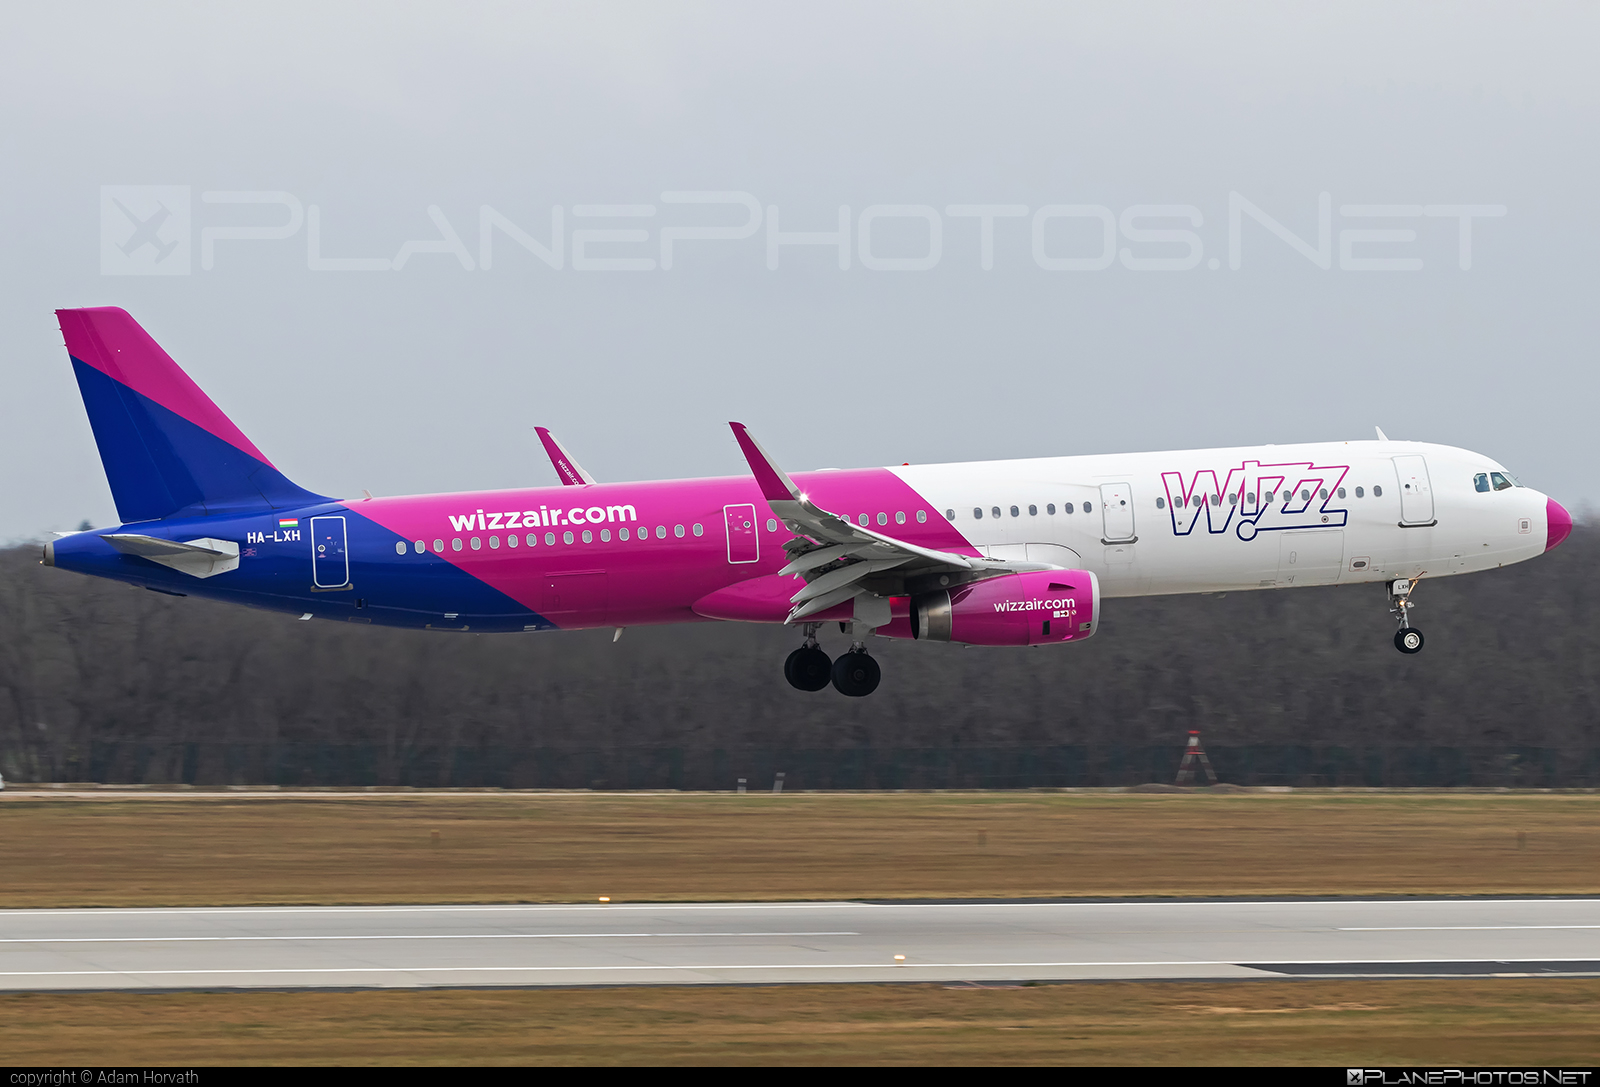 Airbus A321-231 - HA-LXH operated by Wizz Air #a320family #a321 #airbus #airbus321 #wizz #wizzair